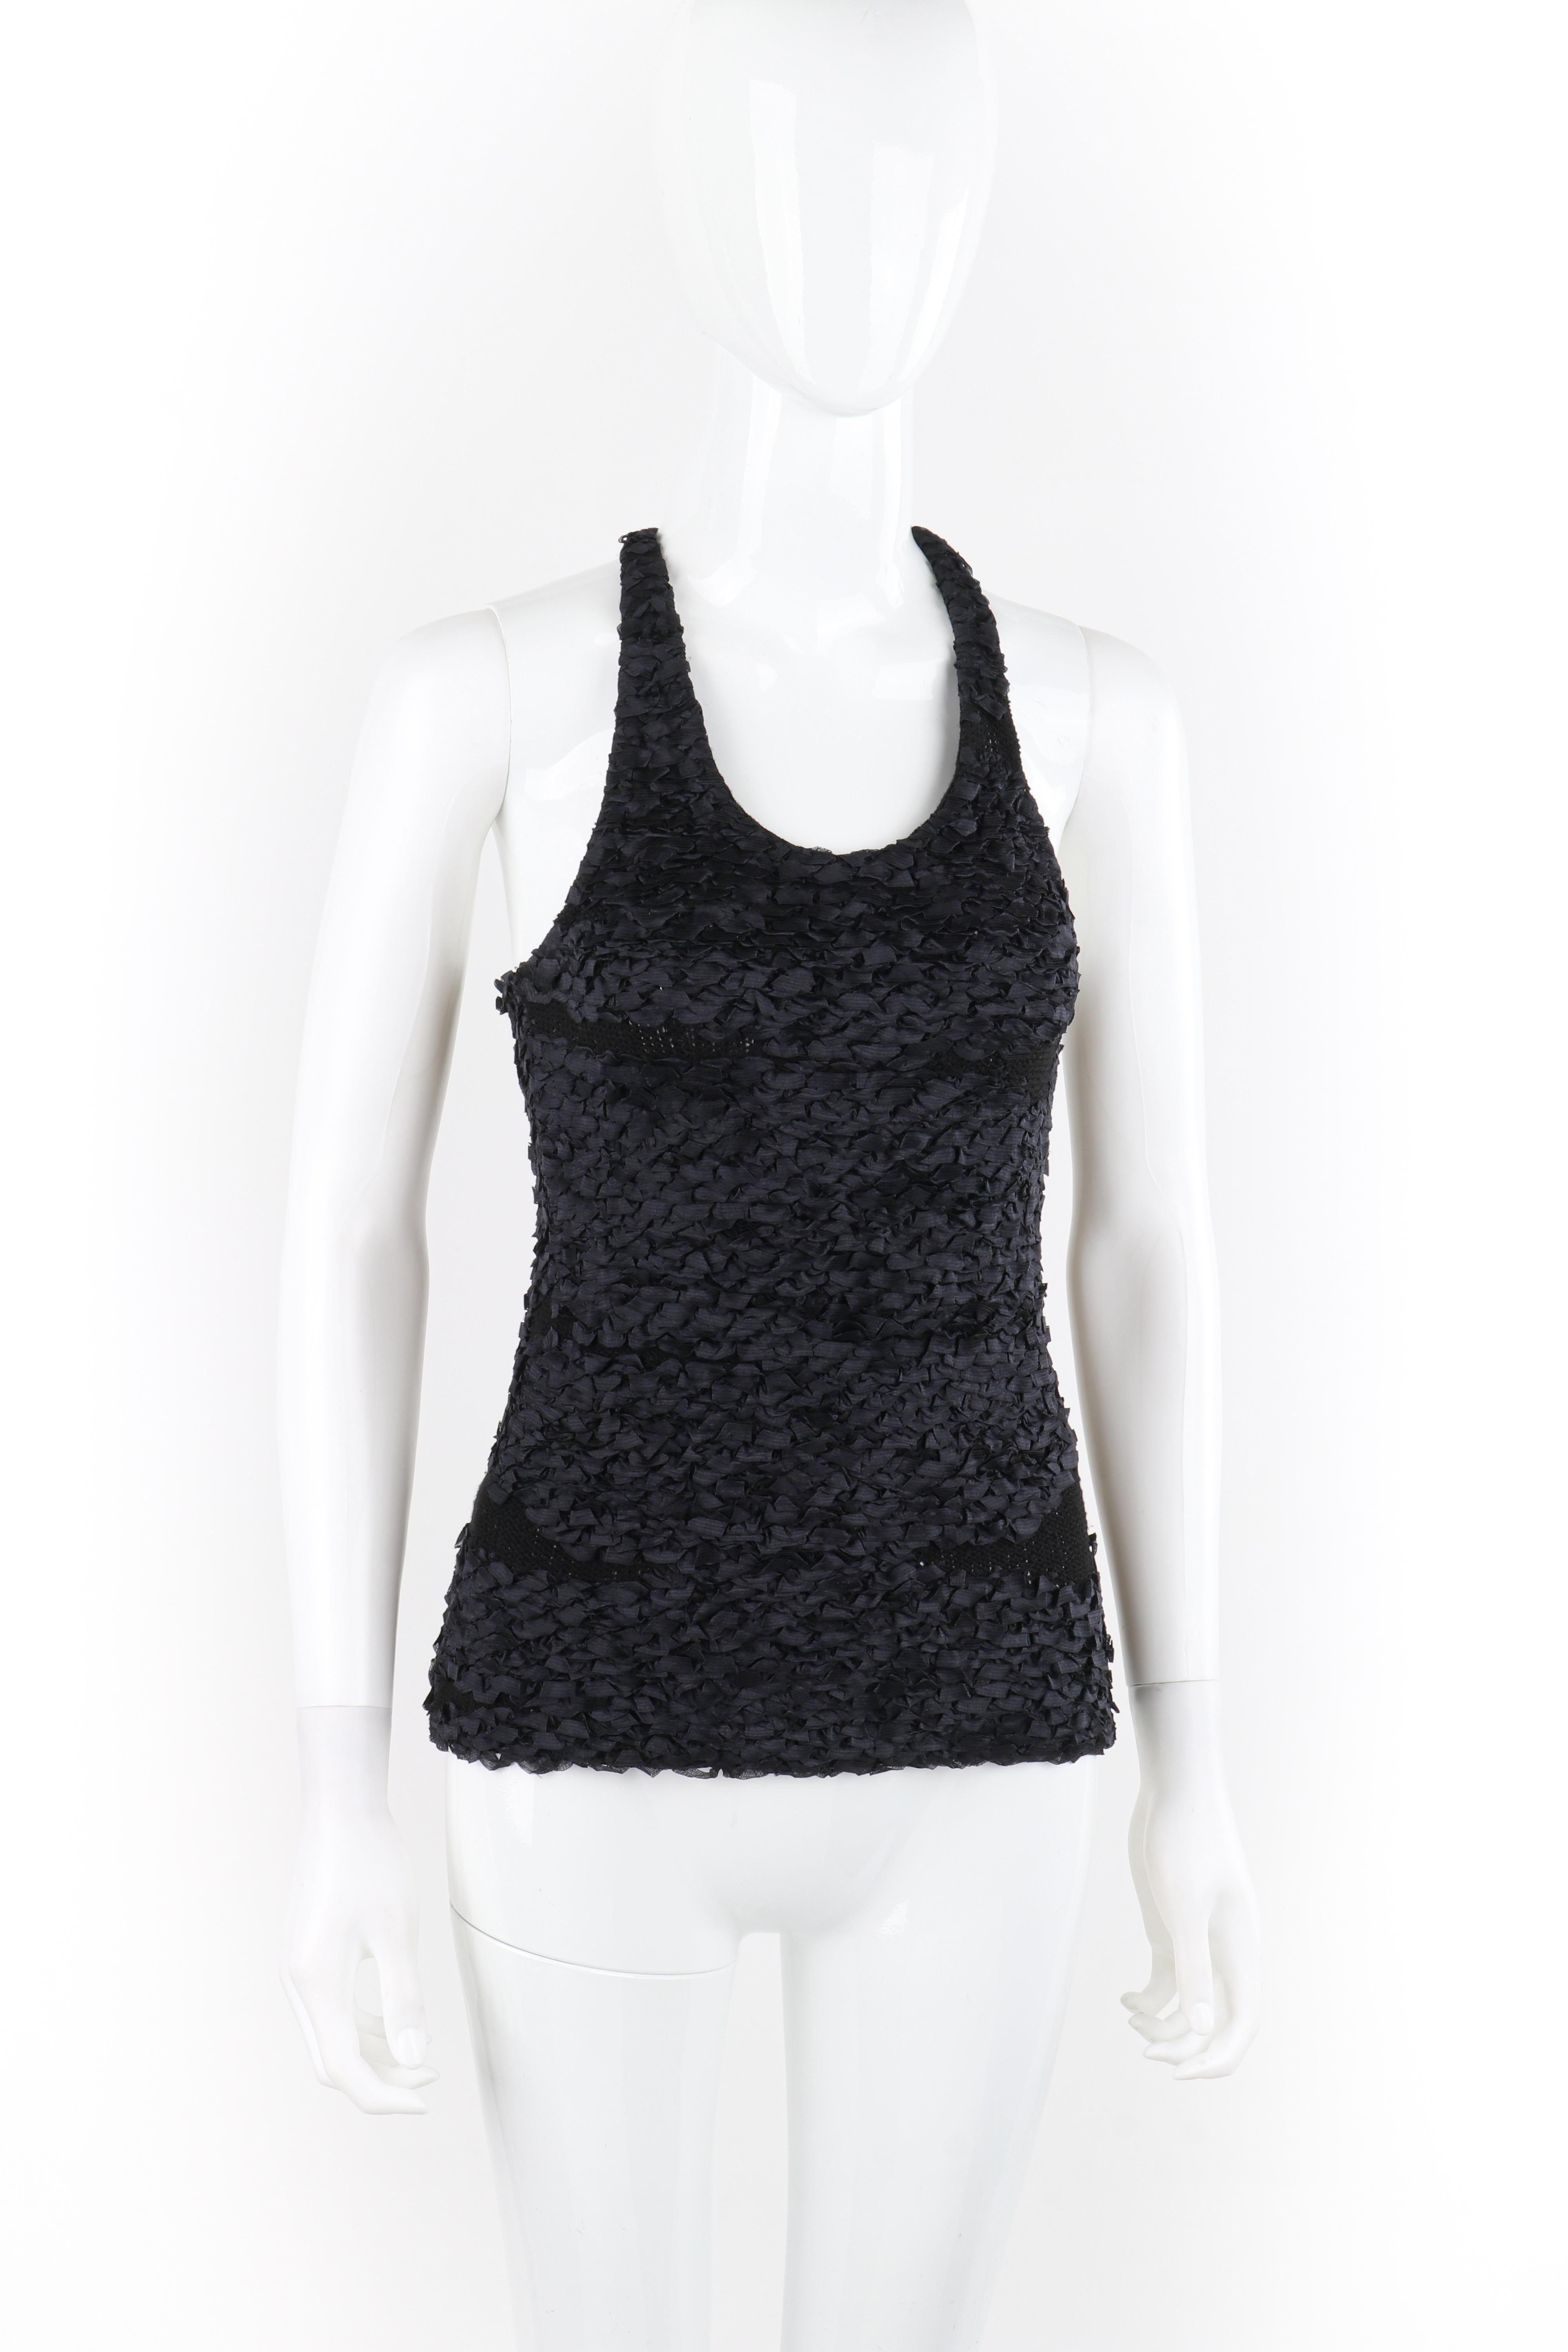 ALEXANDER McQUEEN c.2000s Black Silk Stretch Knit Ribbon Racerback Tank Top In Good Condition For Sale In Thiensville, WI